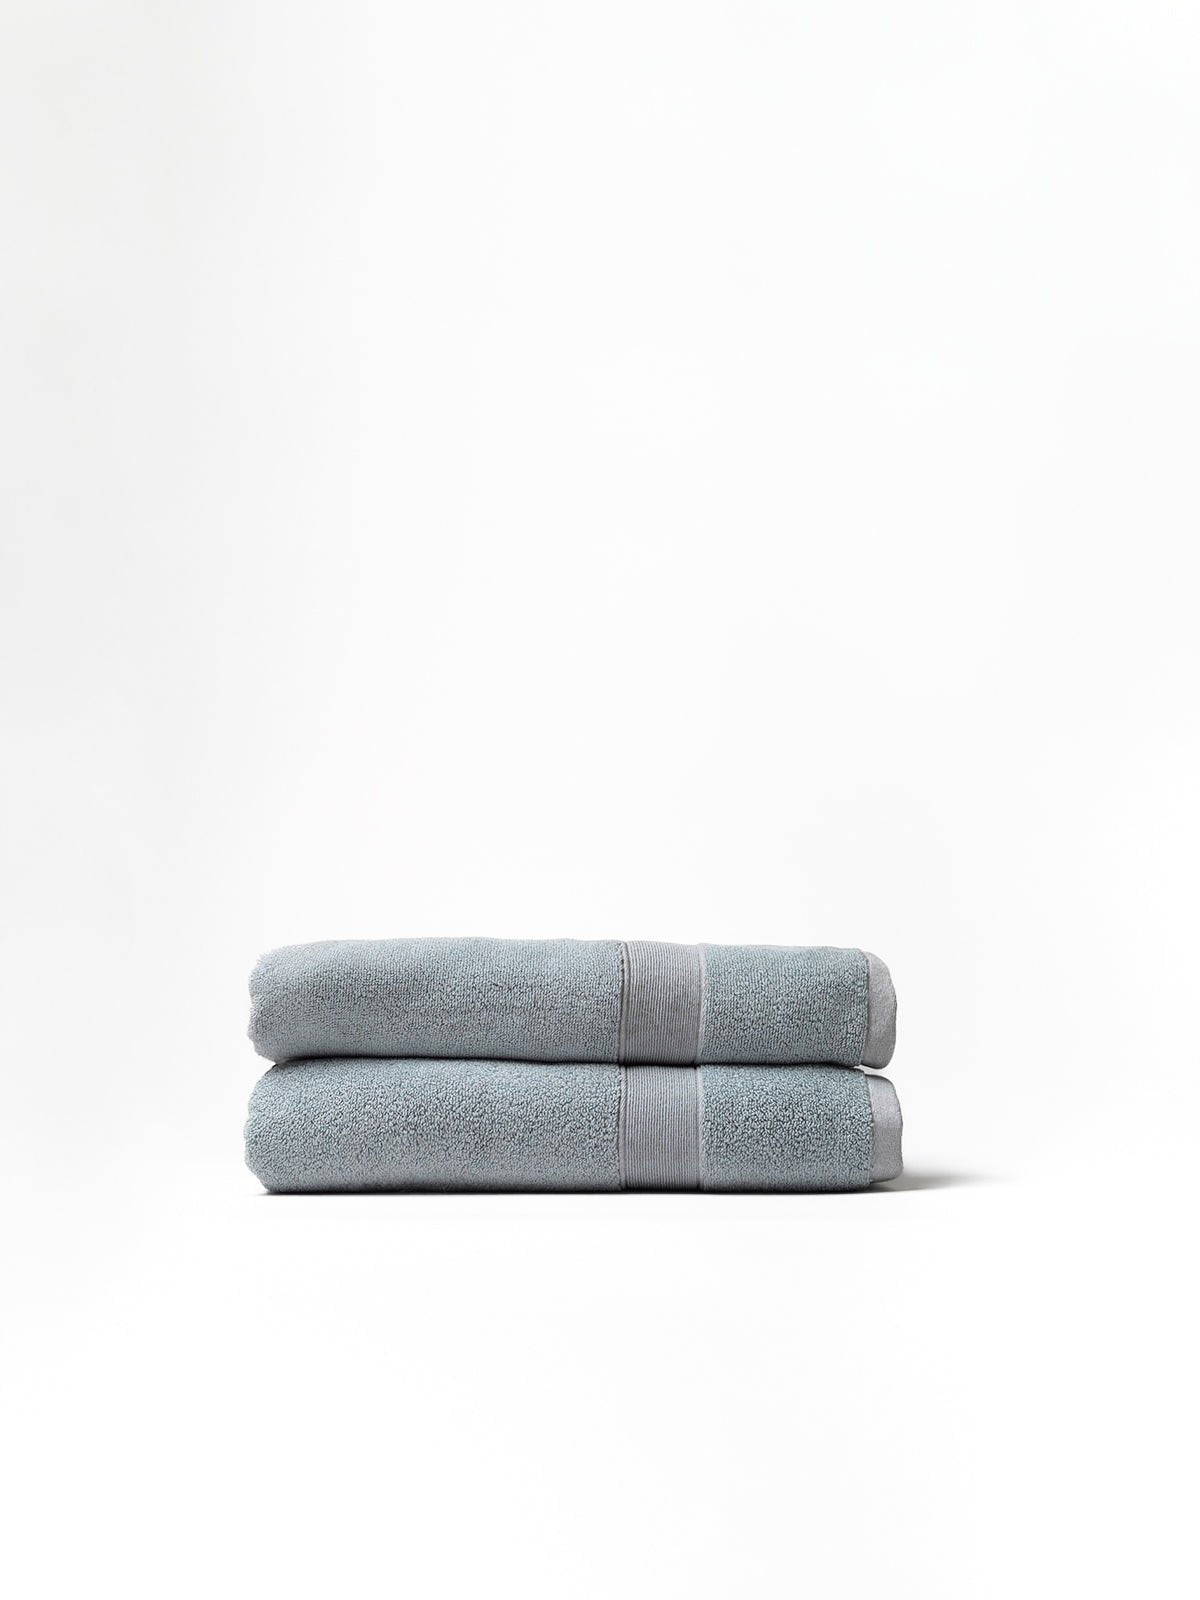 Harbor mist luxe bath towels folded with white background |Color:Harbor Mist